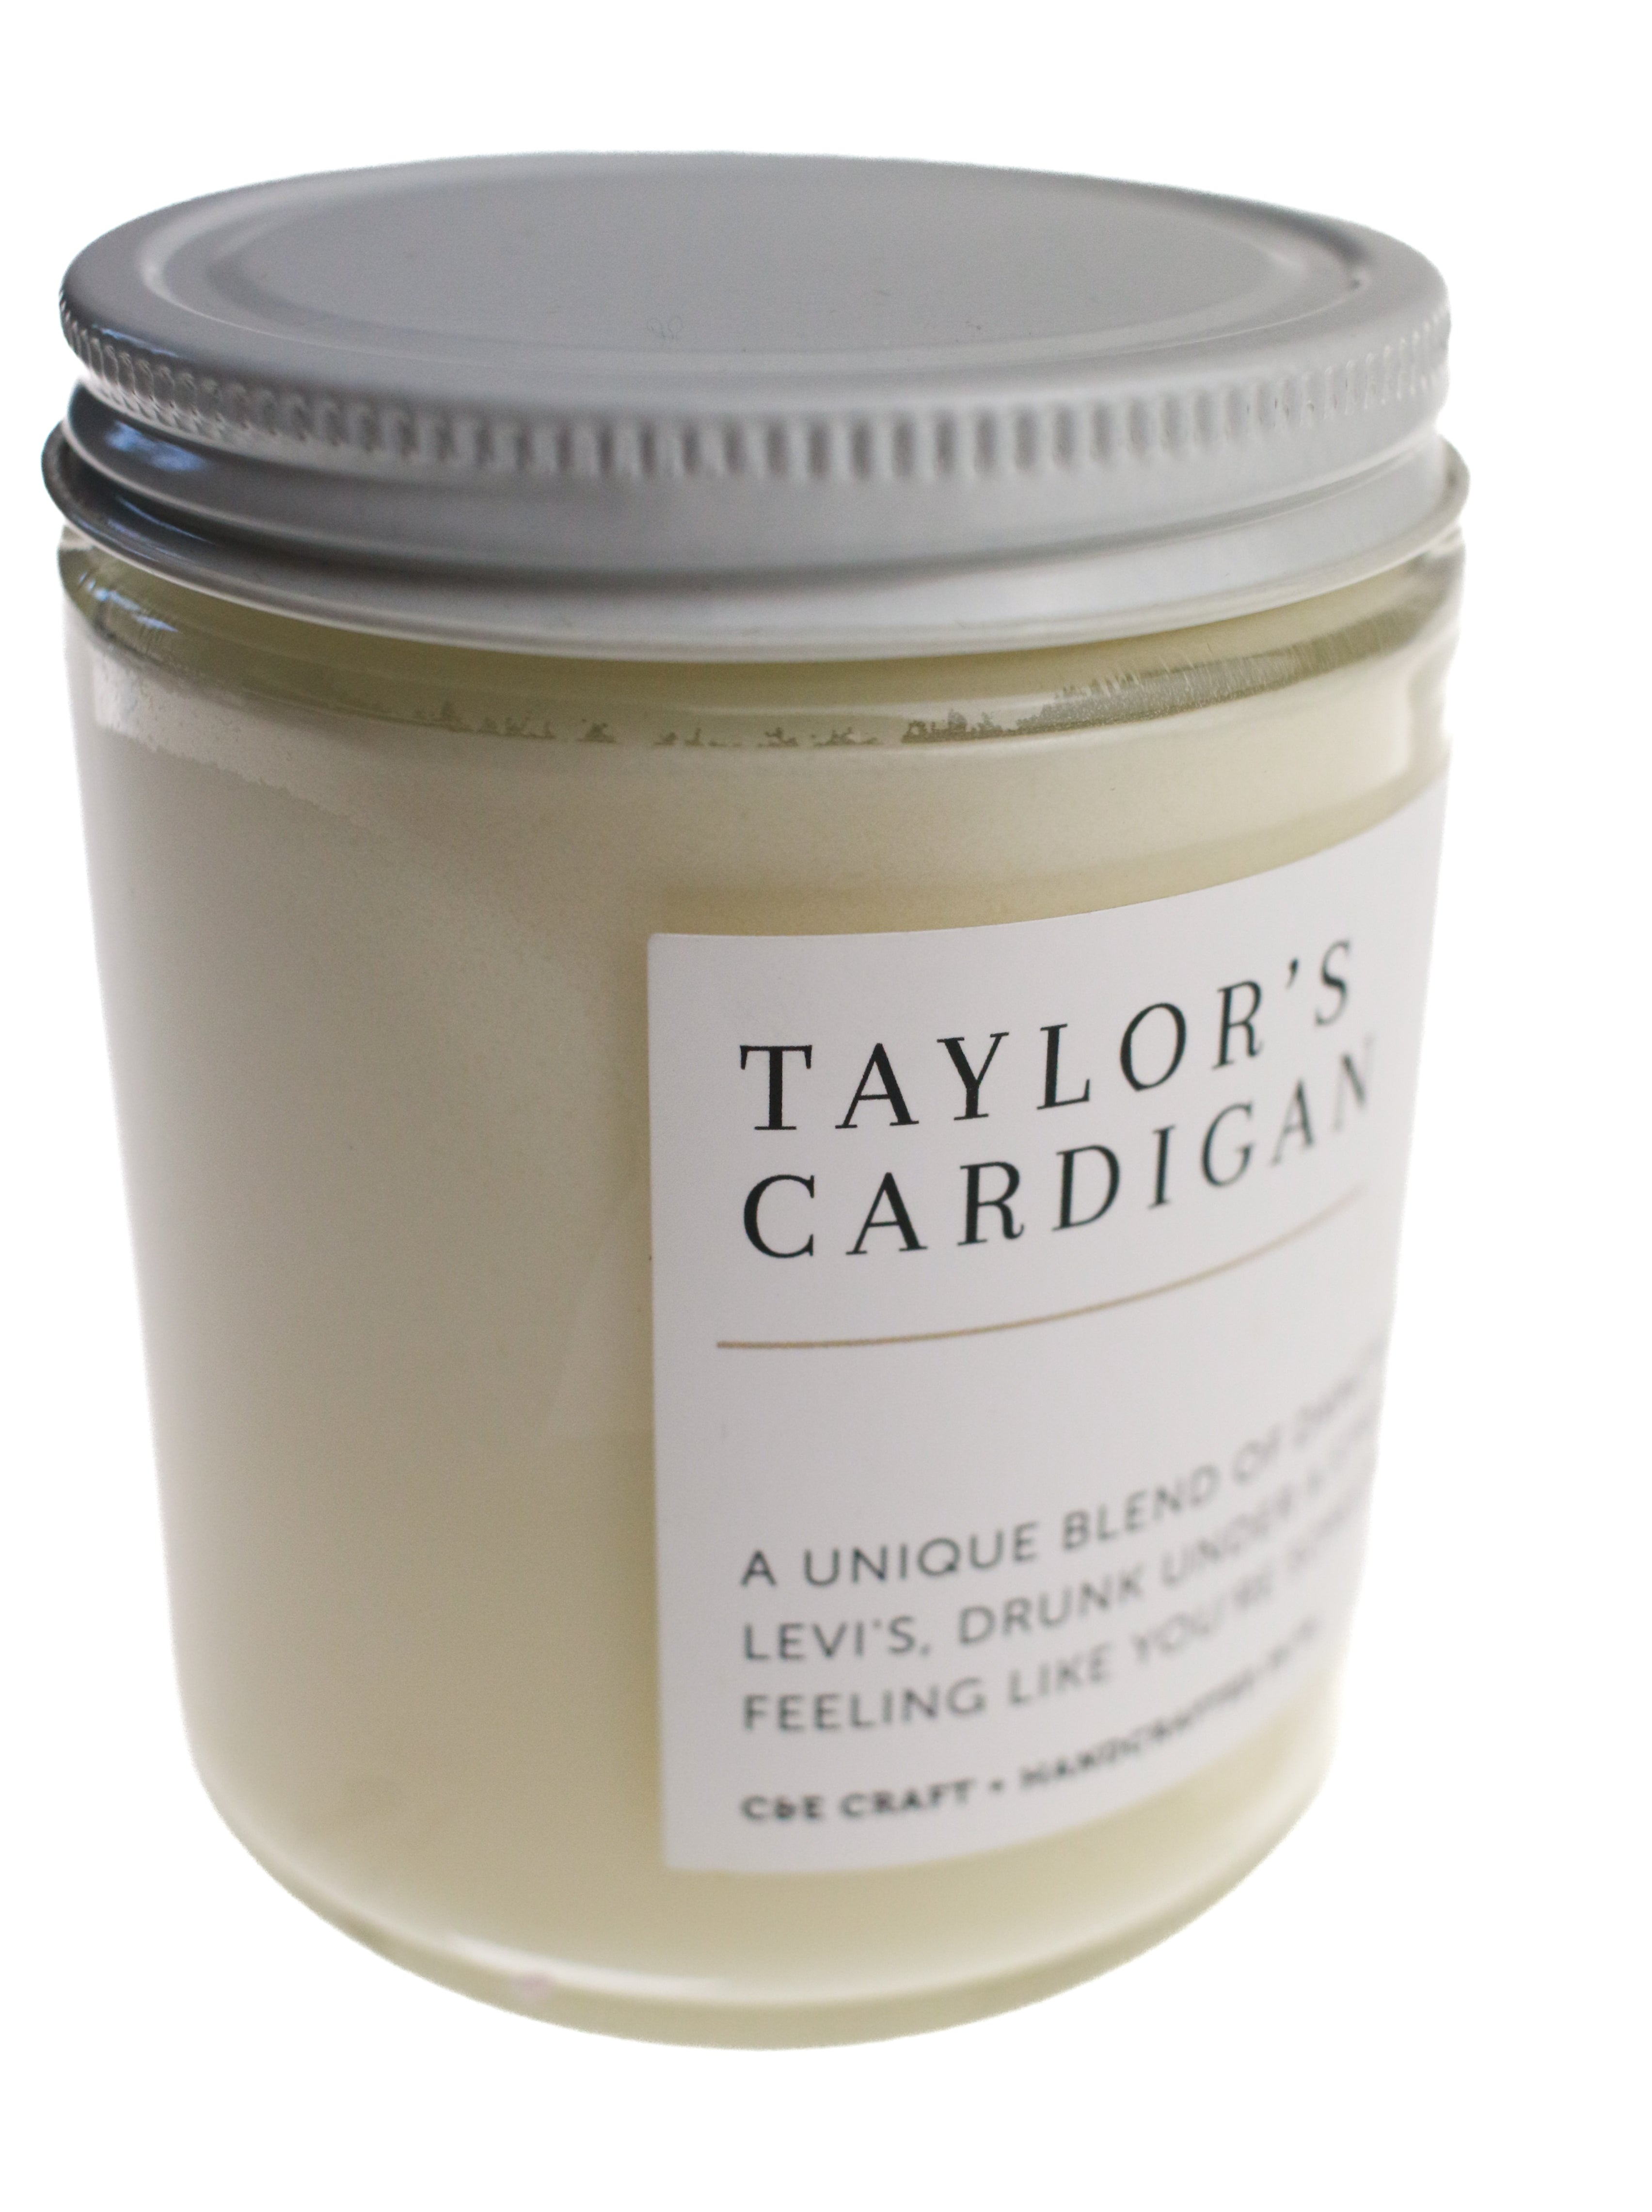 Taylor's Cardigan Candle